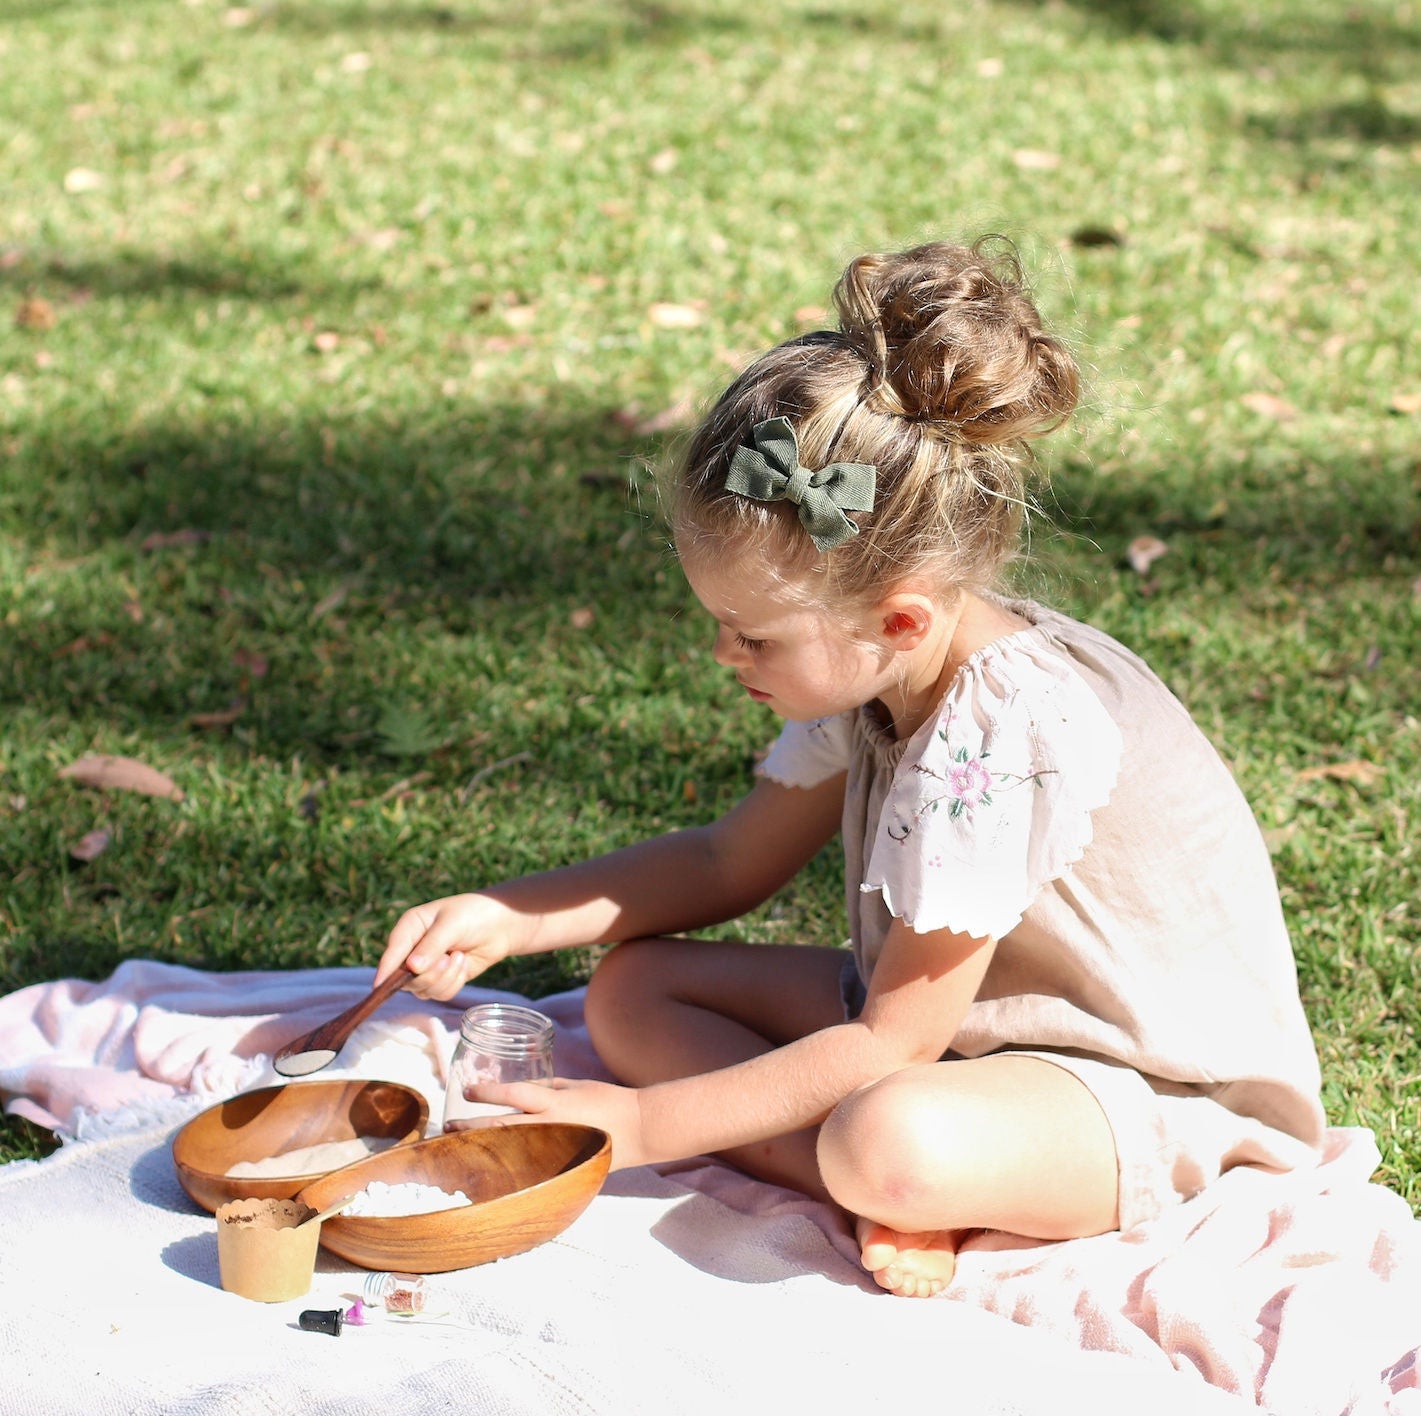 Poppy and daisy mini fairy garden kit being completed by girl sitting on picnic rug on grass